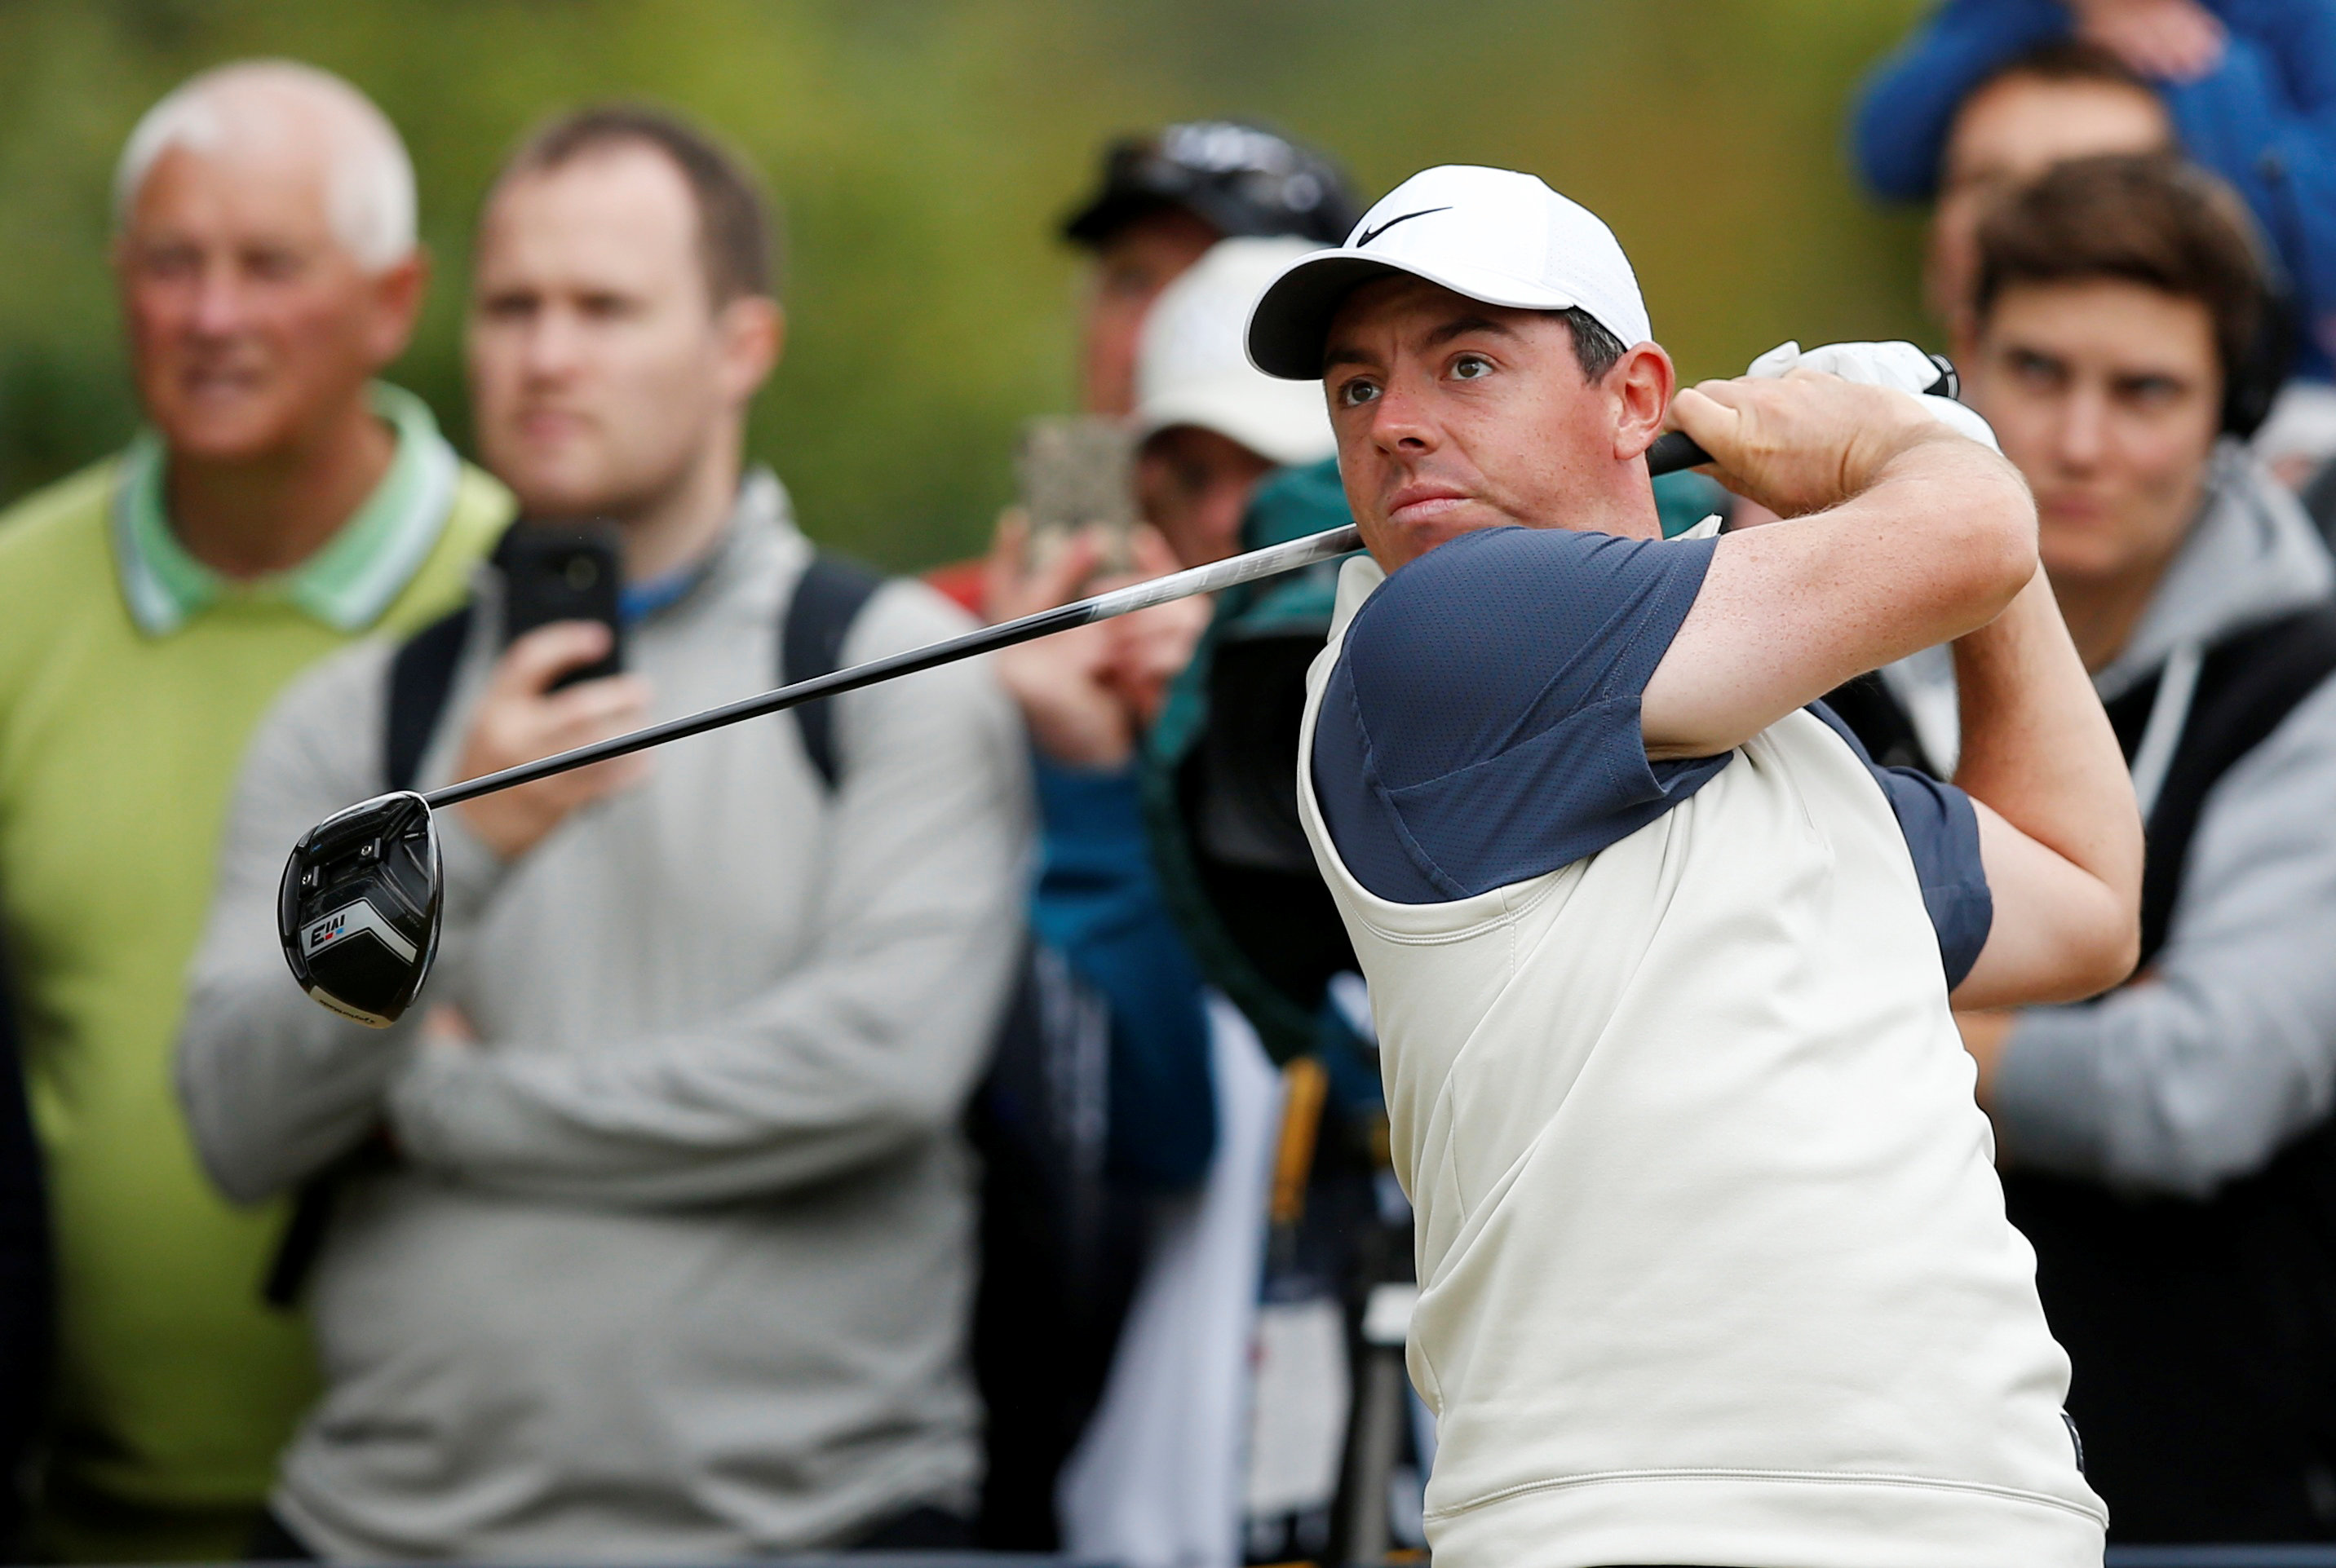 Golf: McIlroy says his brand of driver is being tested